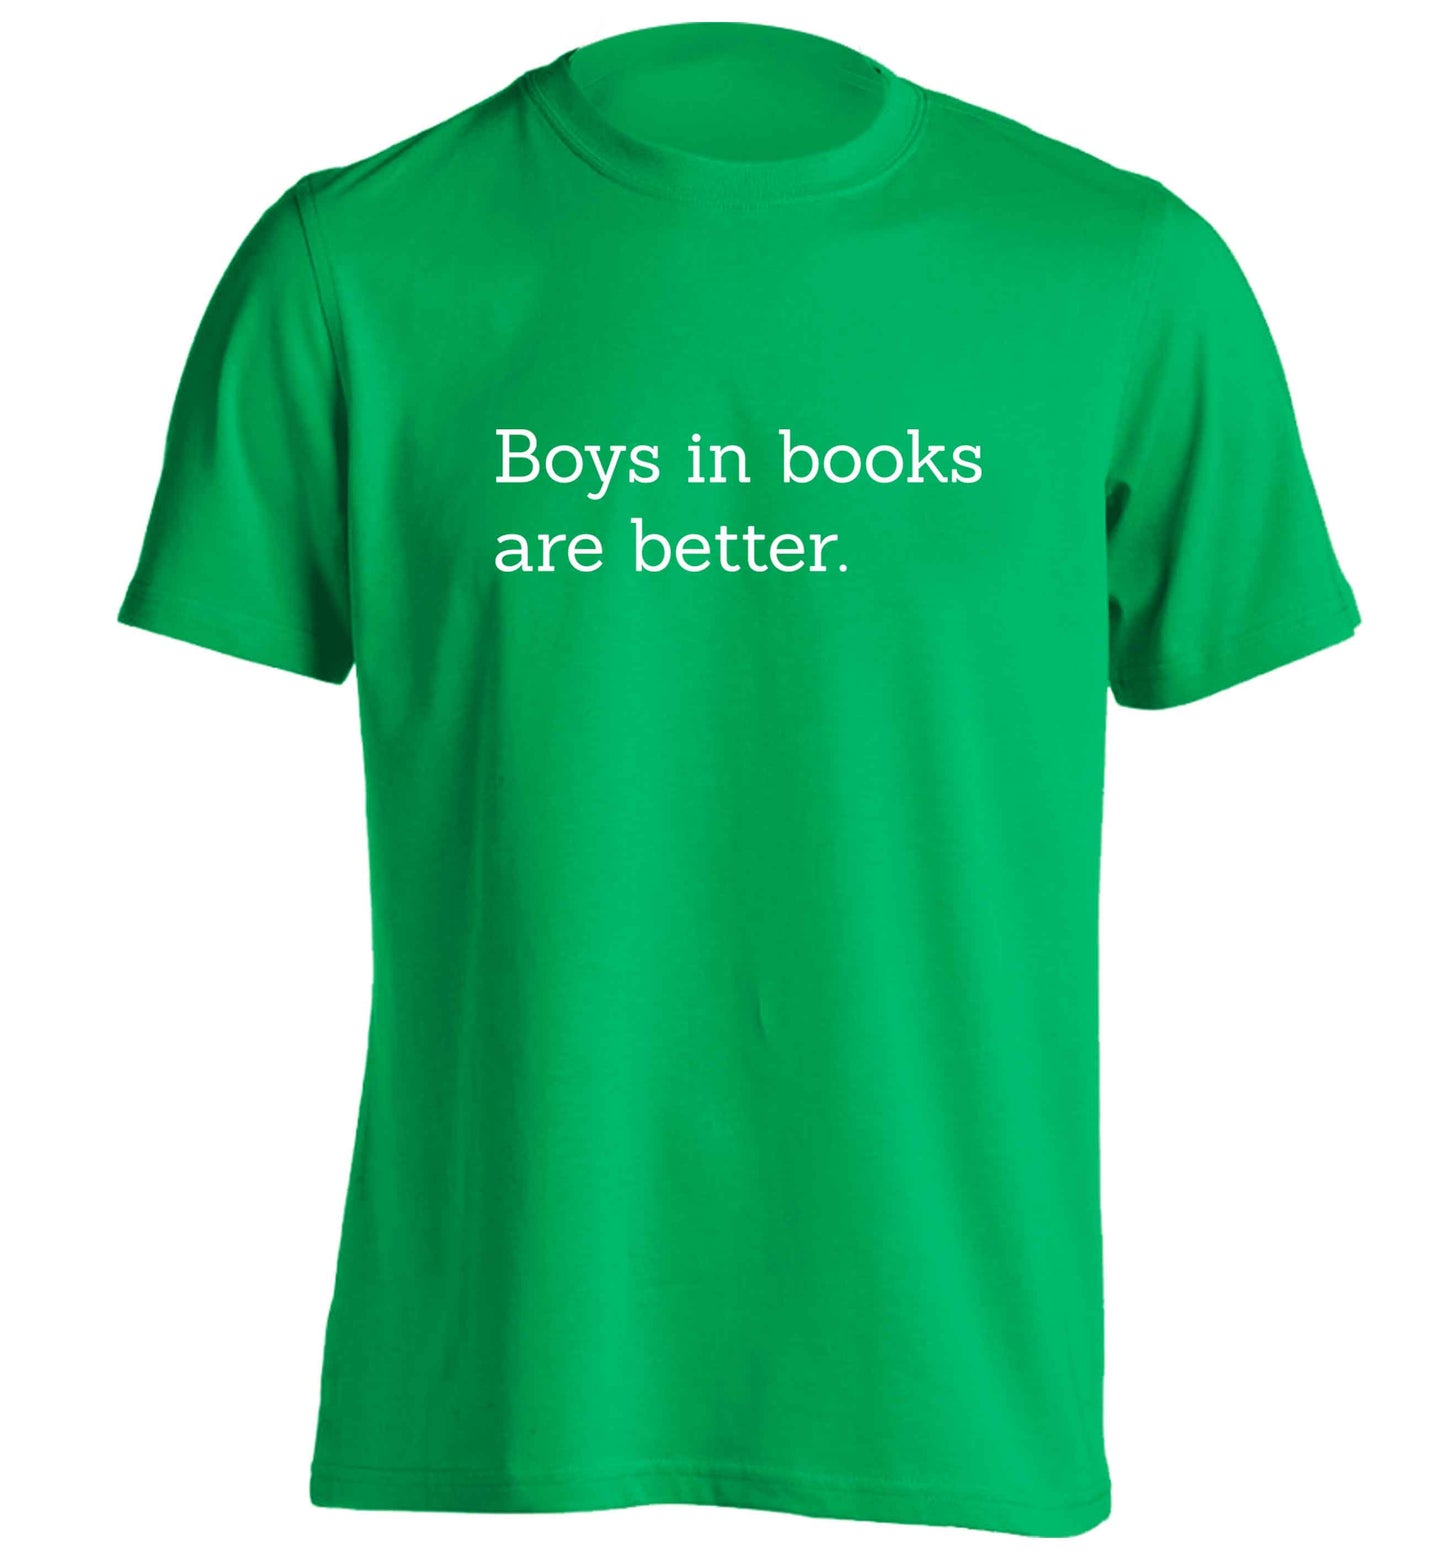 Boys in books are better adults unisex green Tshirt 2XL